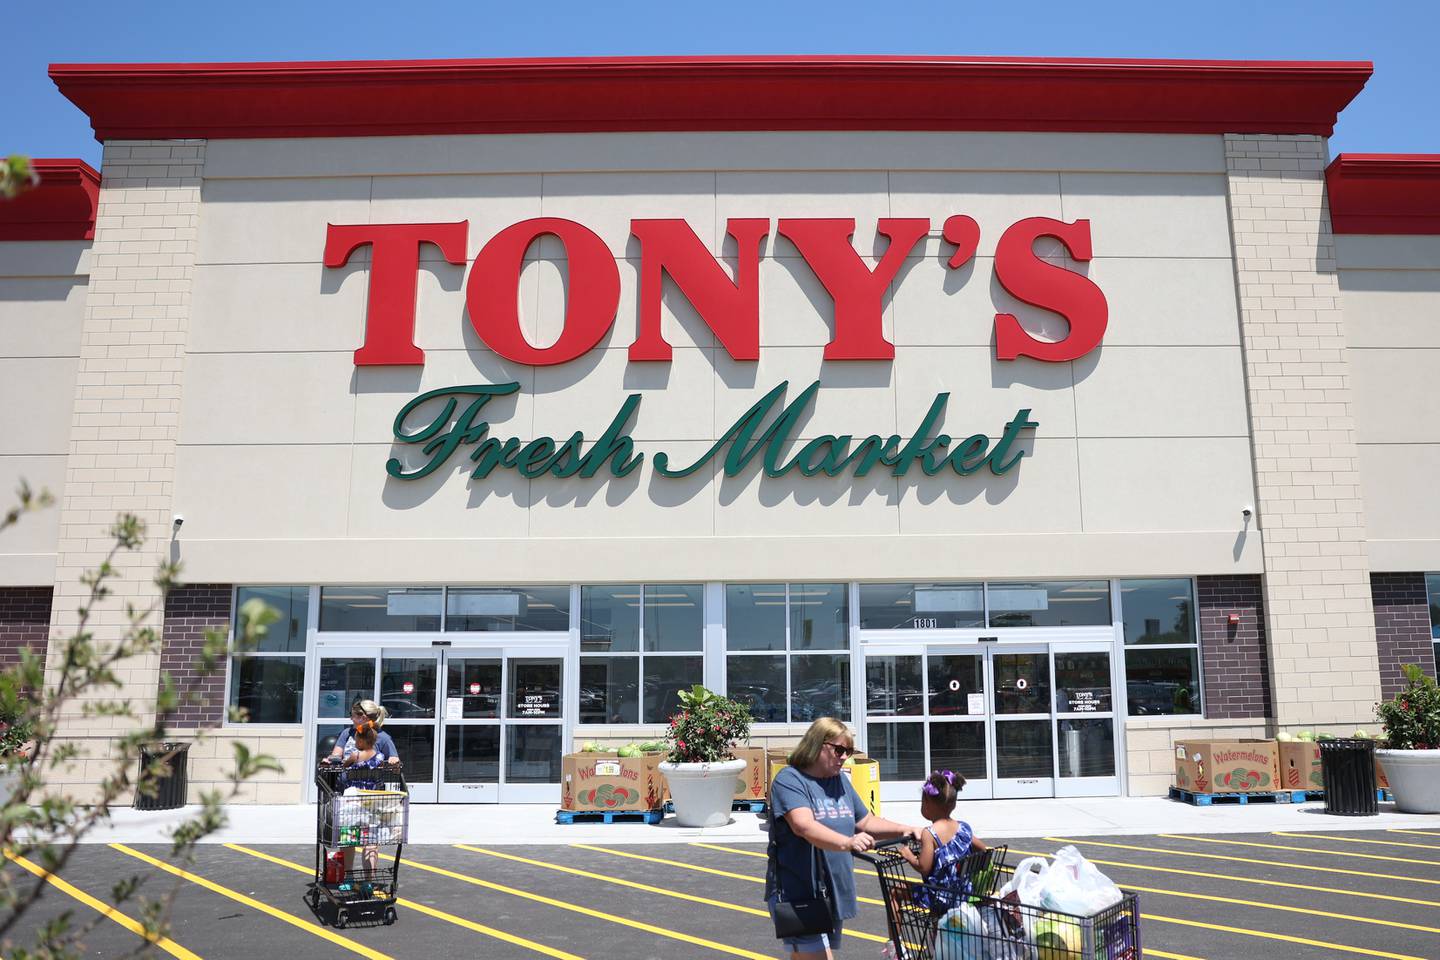 Tony’s Fresh Market held its grand opening for their Joliet location on Wednesday. Wednesday, June 28, 2022 in Joliet.